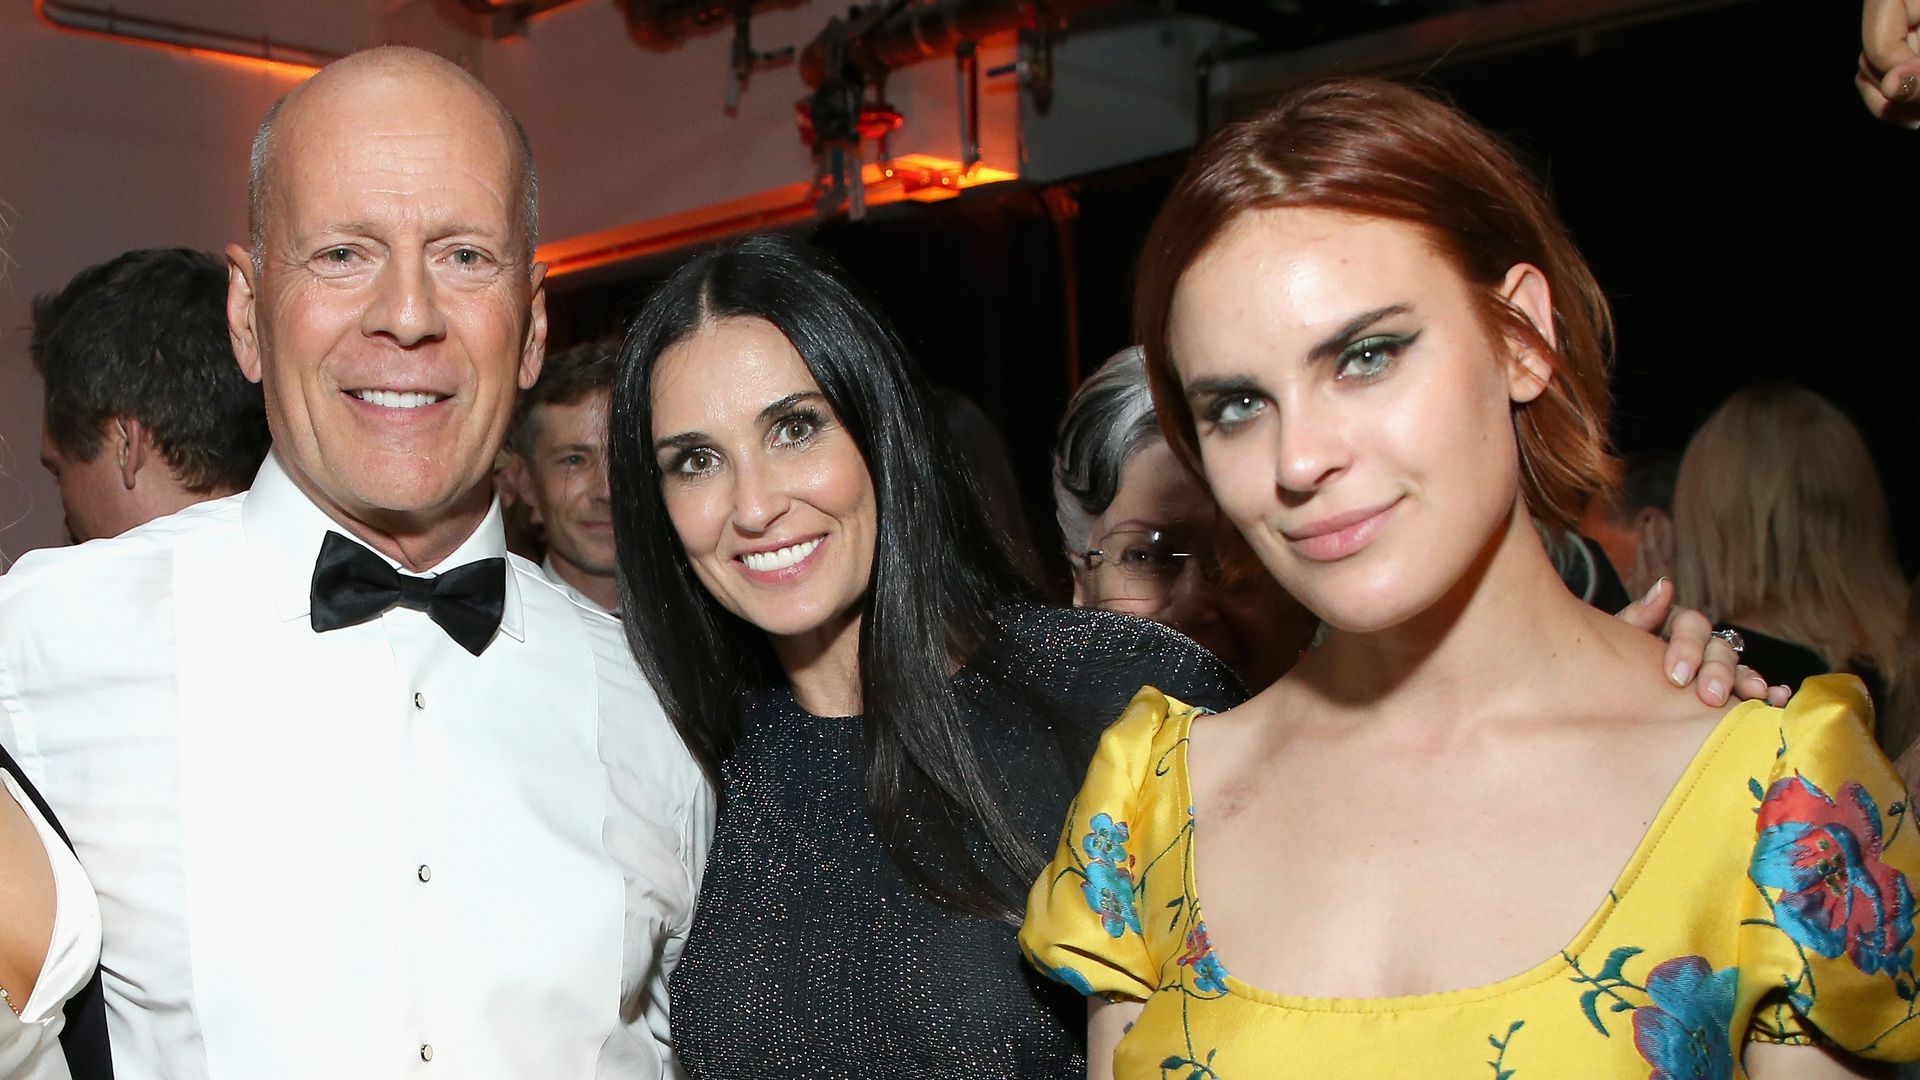 Bruce Willis, Demi Moore and Tallulah Belle Willis attend the after party for the Comedy Central Roast of Bruce Willis at NeueHouse on July 14, 2018 in Los Angeles, California